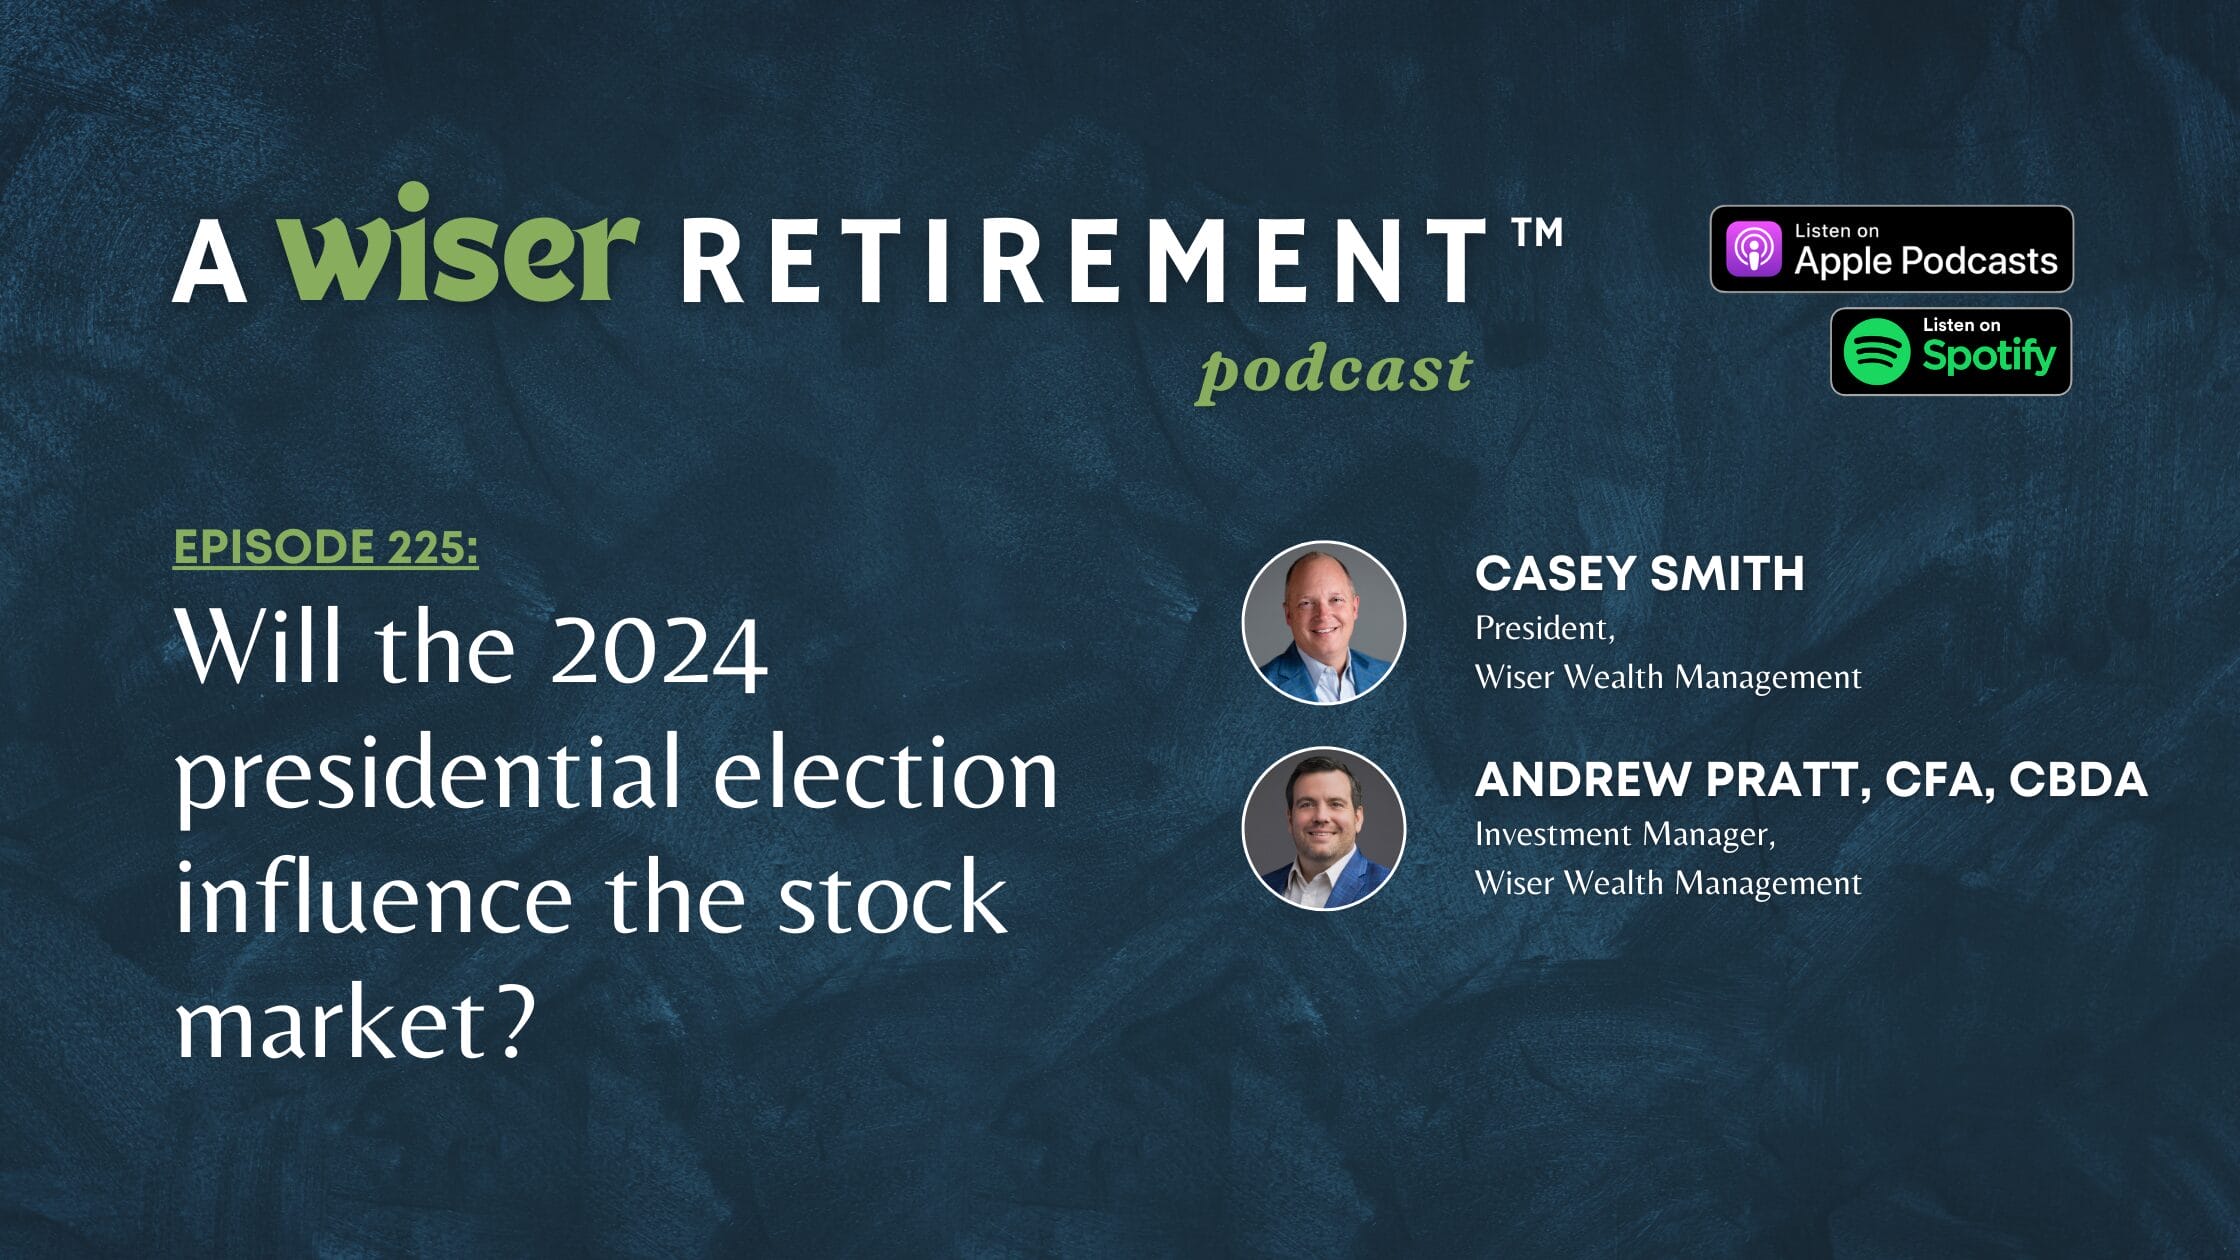 Will the 2024 presidential election influence the stock market?